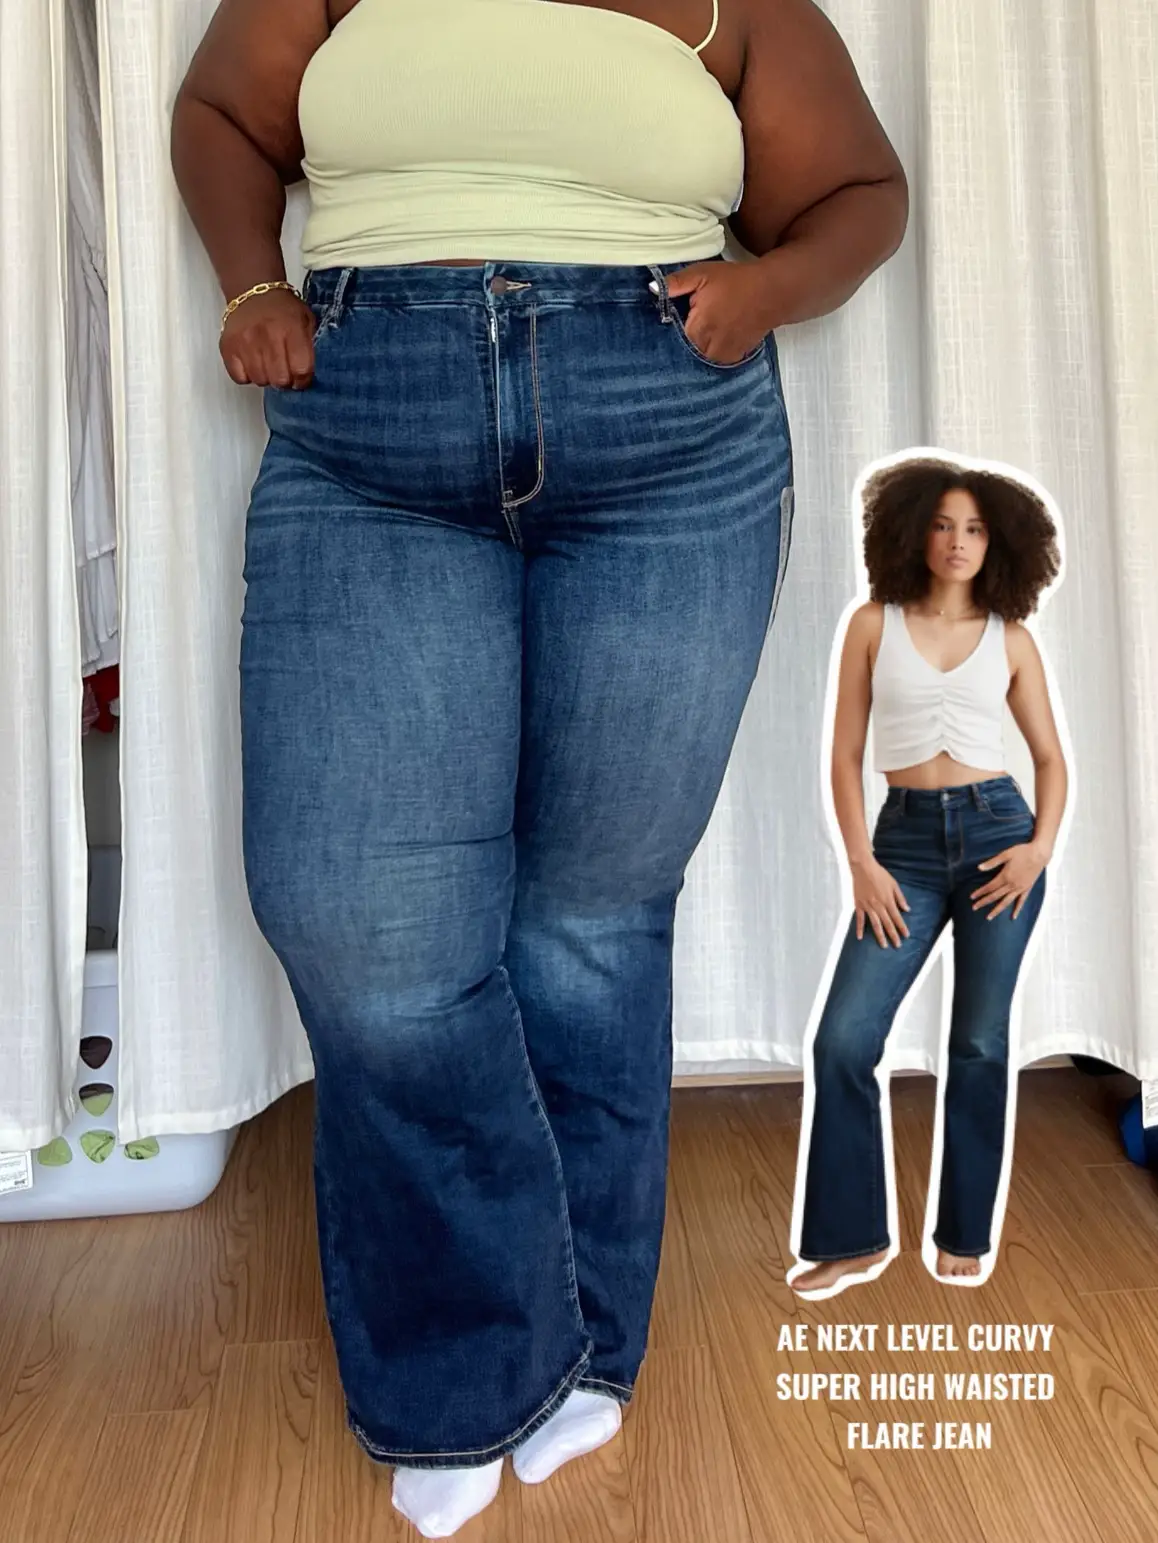 Curvy Jeans Try On Haul  American Eagle Curvy Jeans and Jeggings